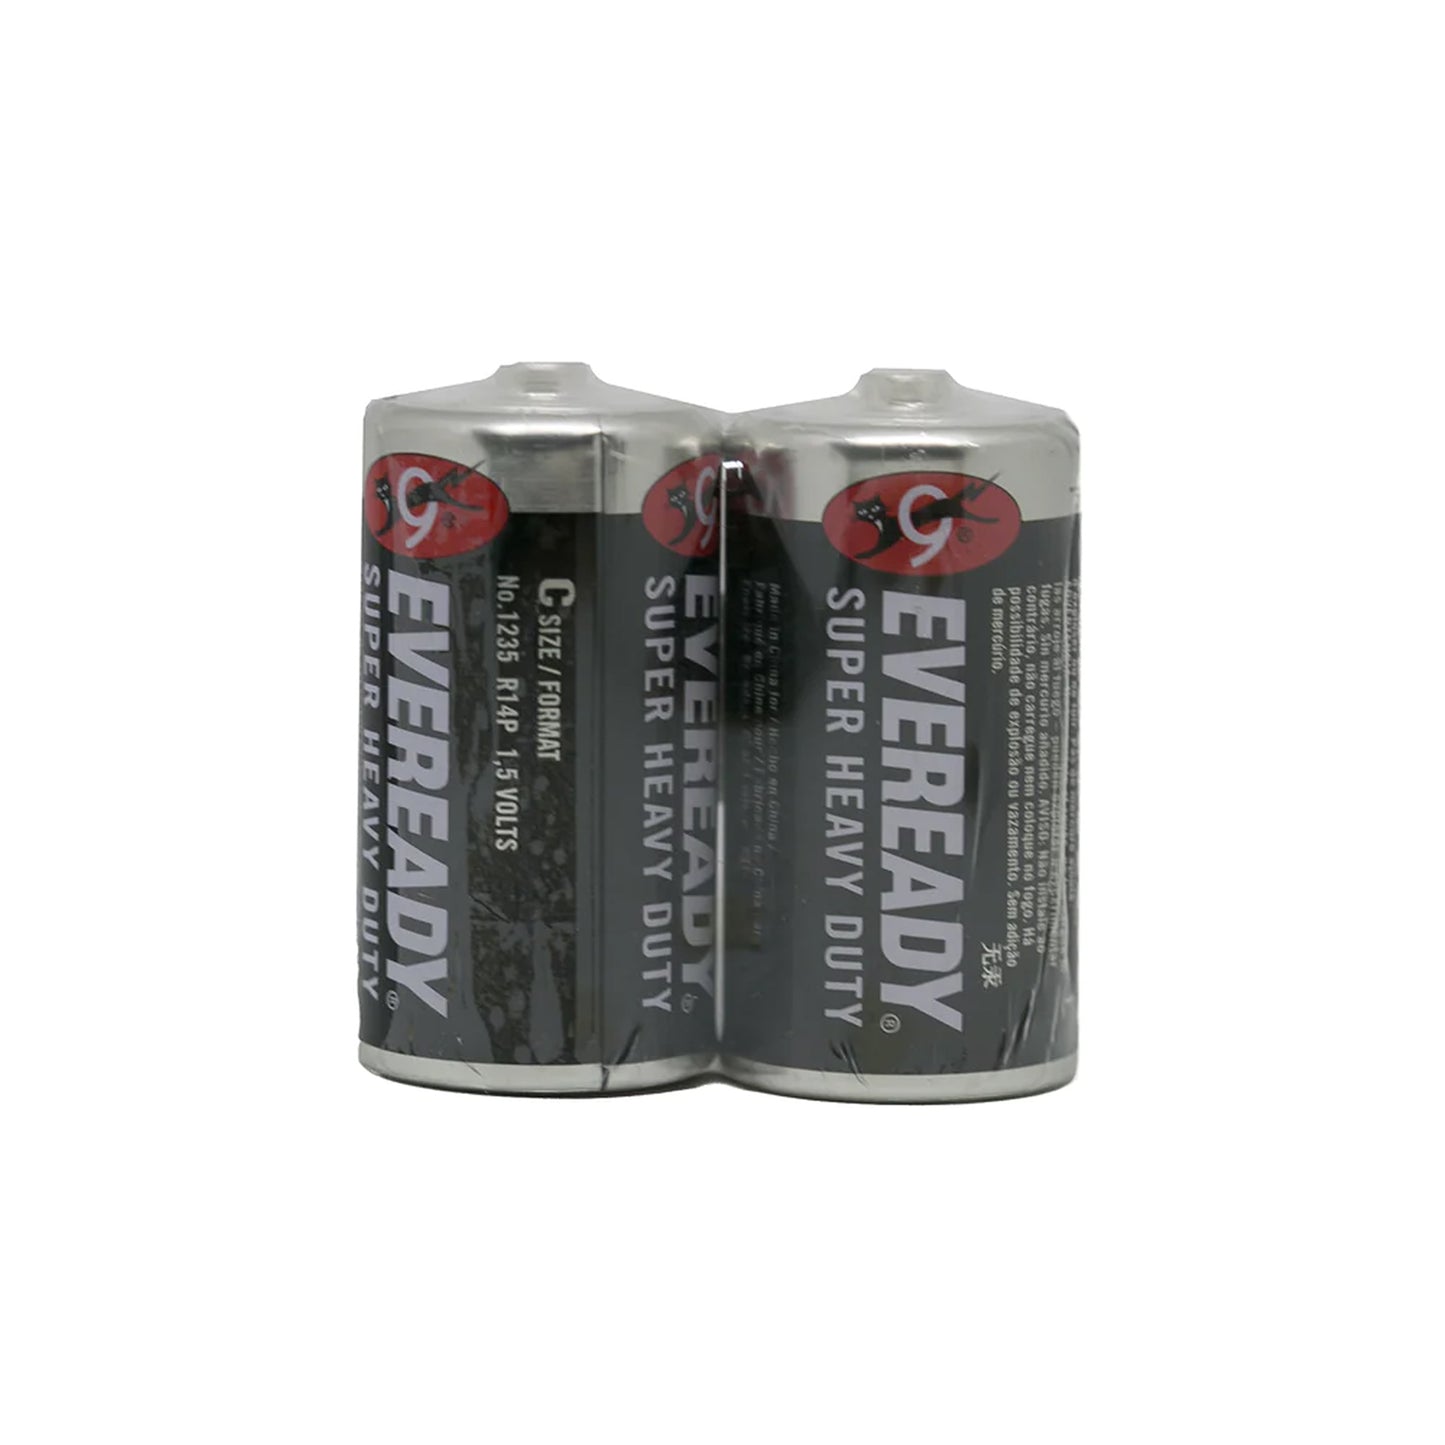 Eveready Battery Size C, Pack of 2's